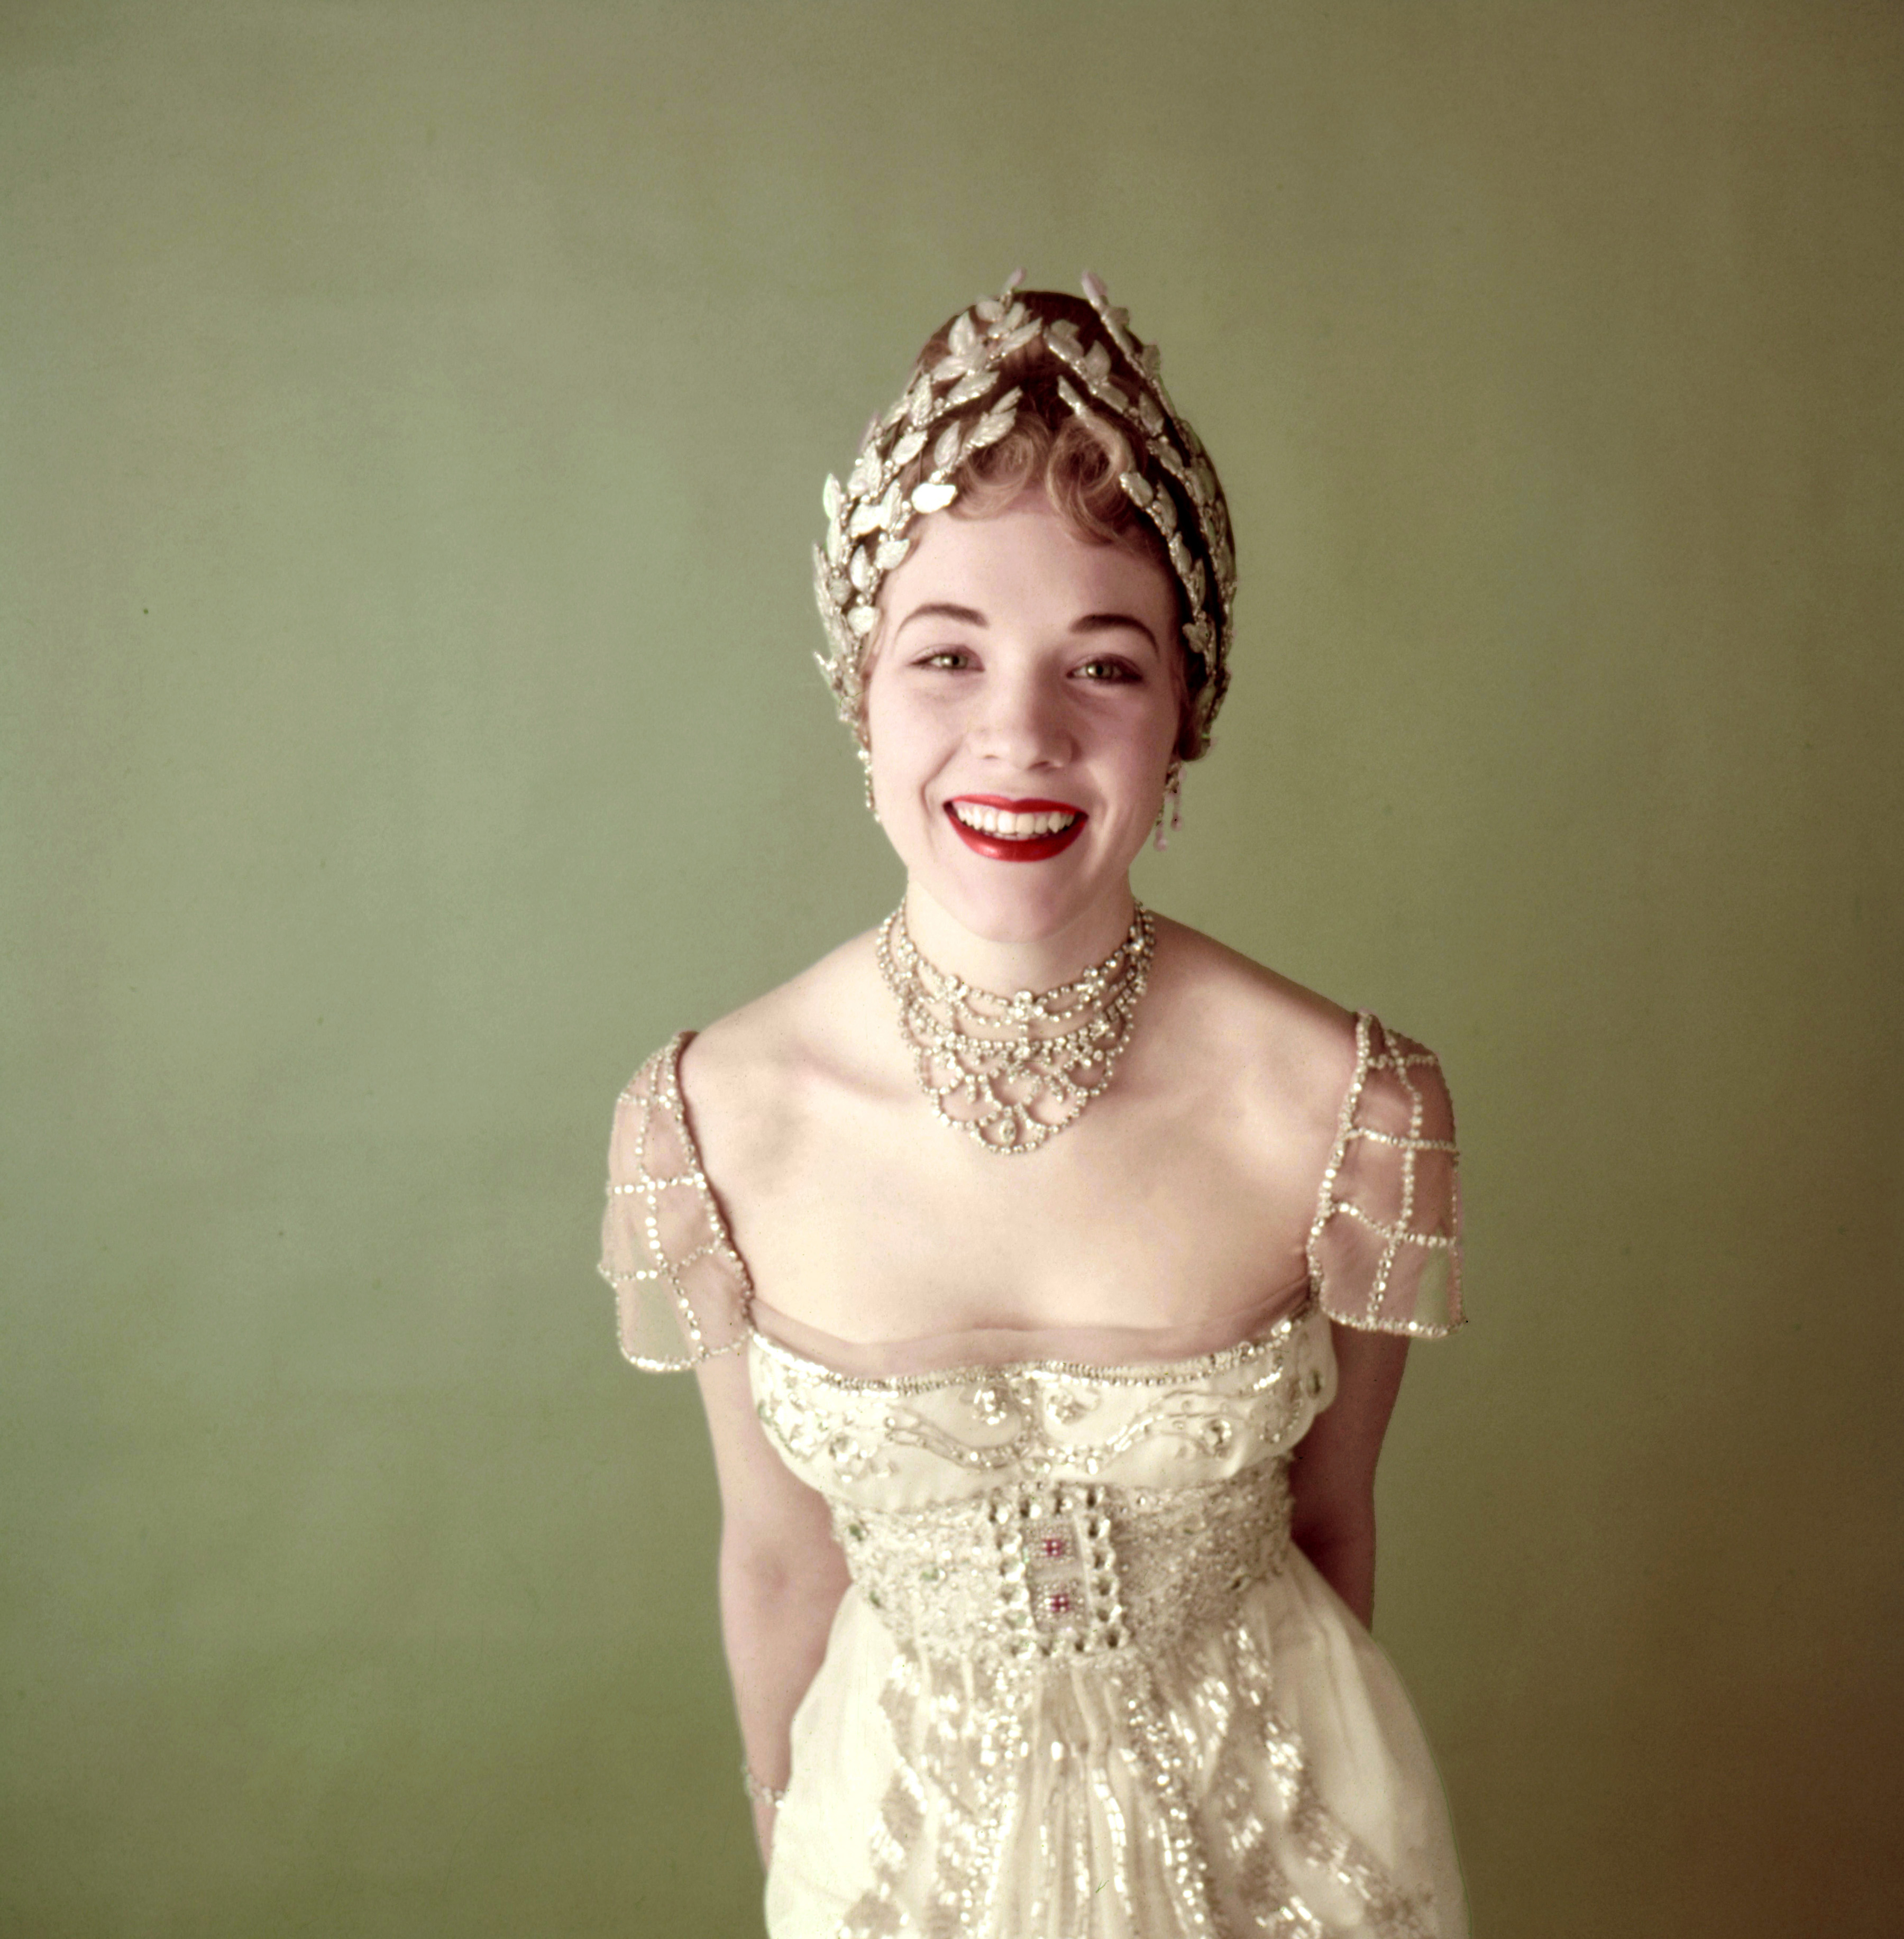 Smiling and wearing a headpiece, multistrand choker and a bejeweled, short-sleeved dress